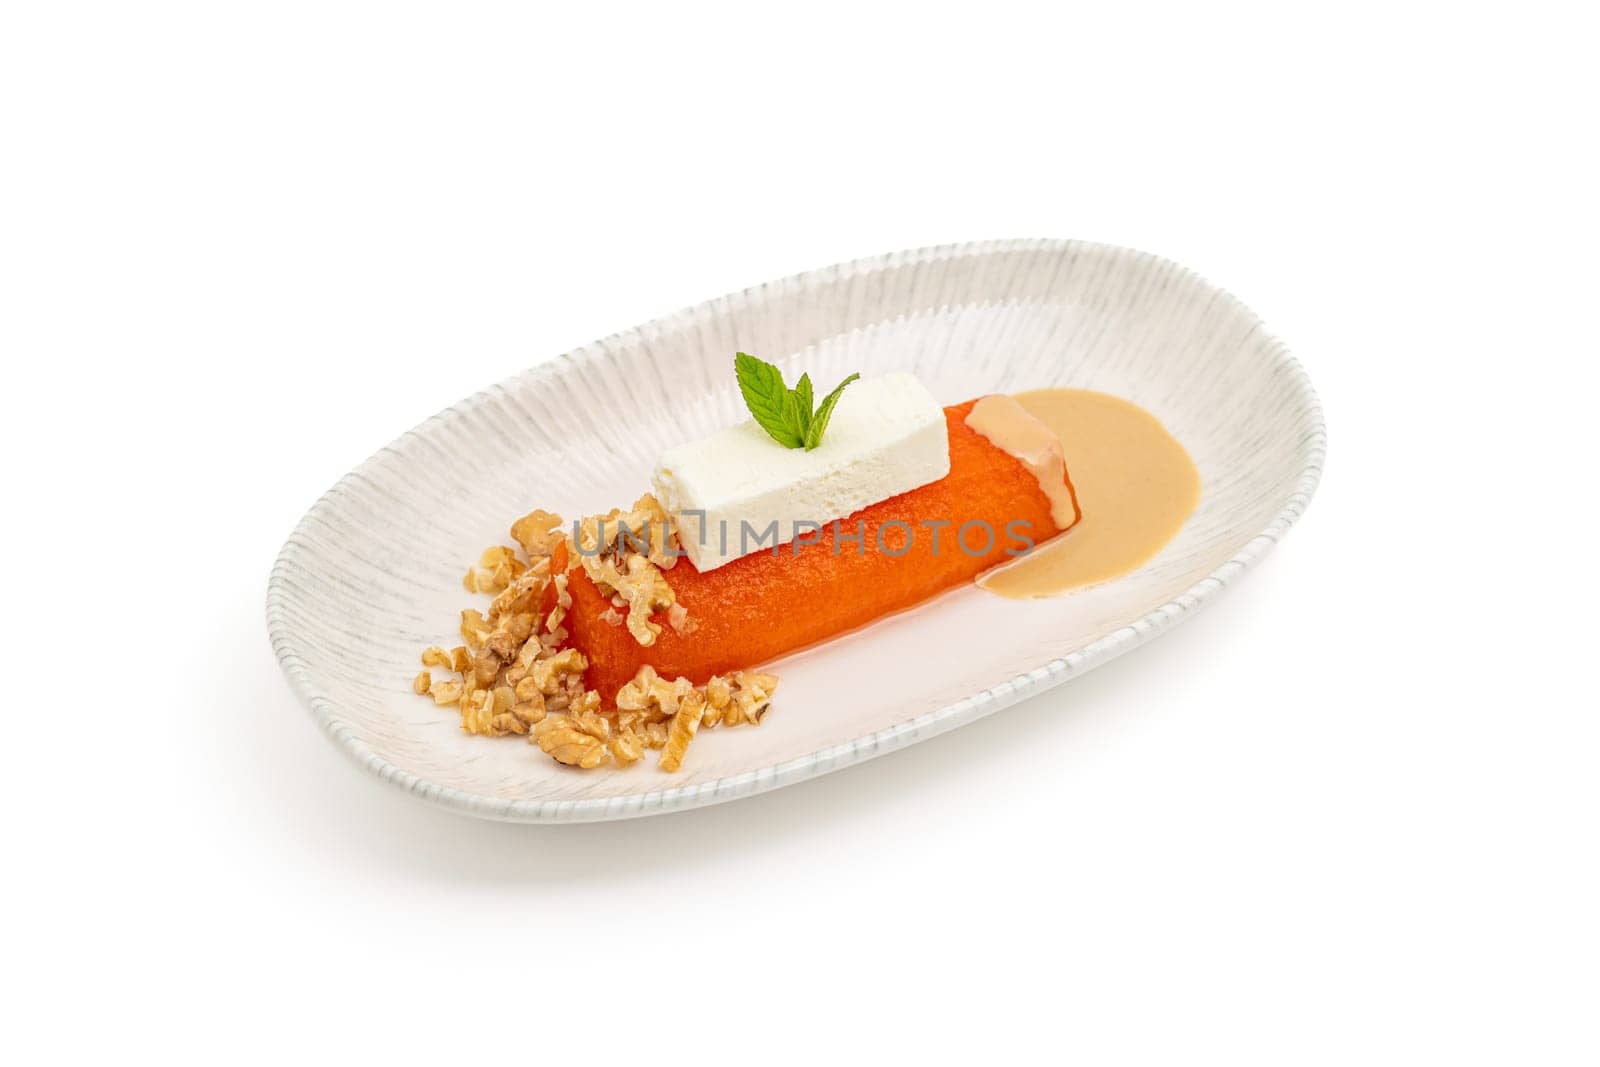 Pumpkin dessert with tahini and walnuts on a white porcelain plate by Sonat